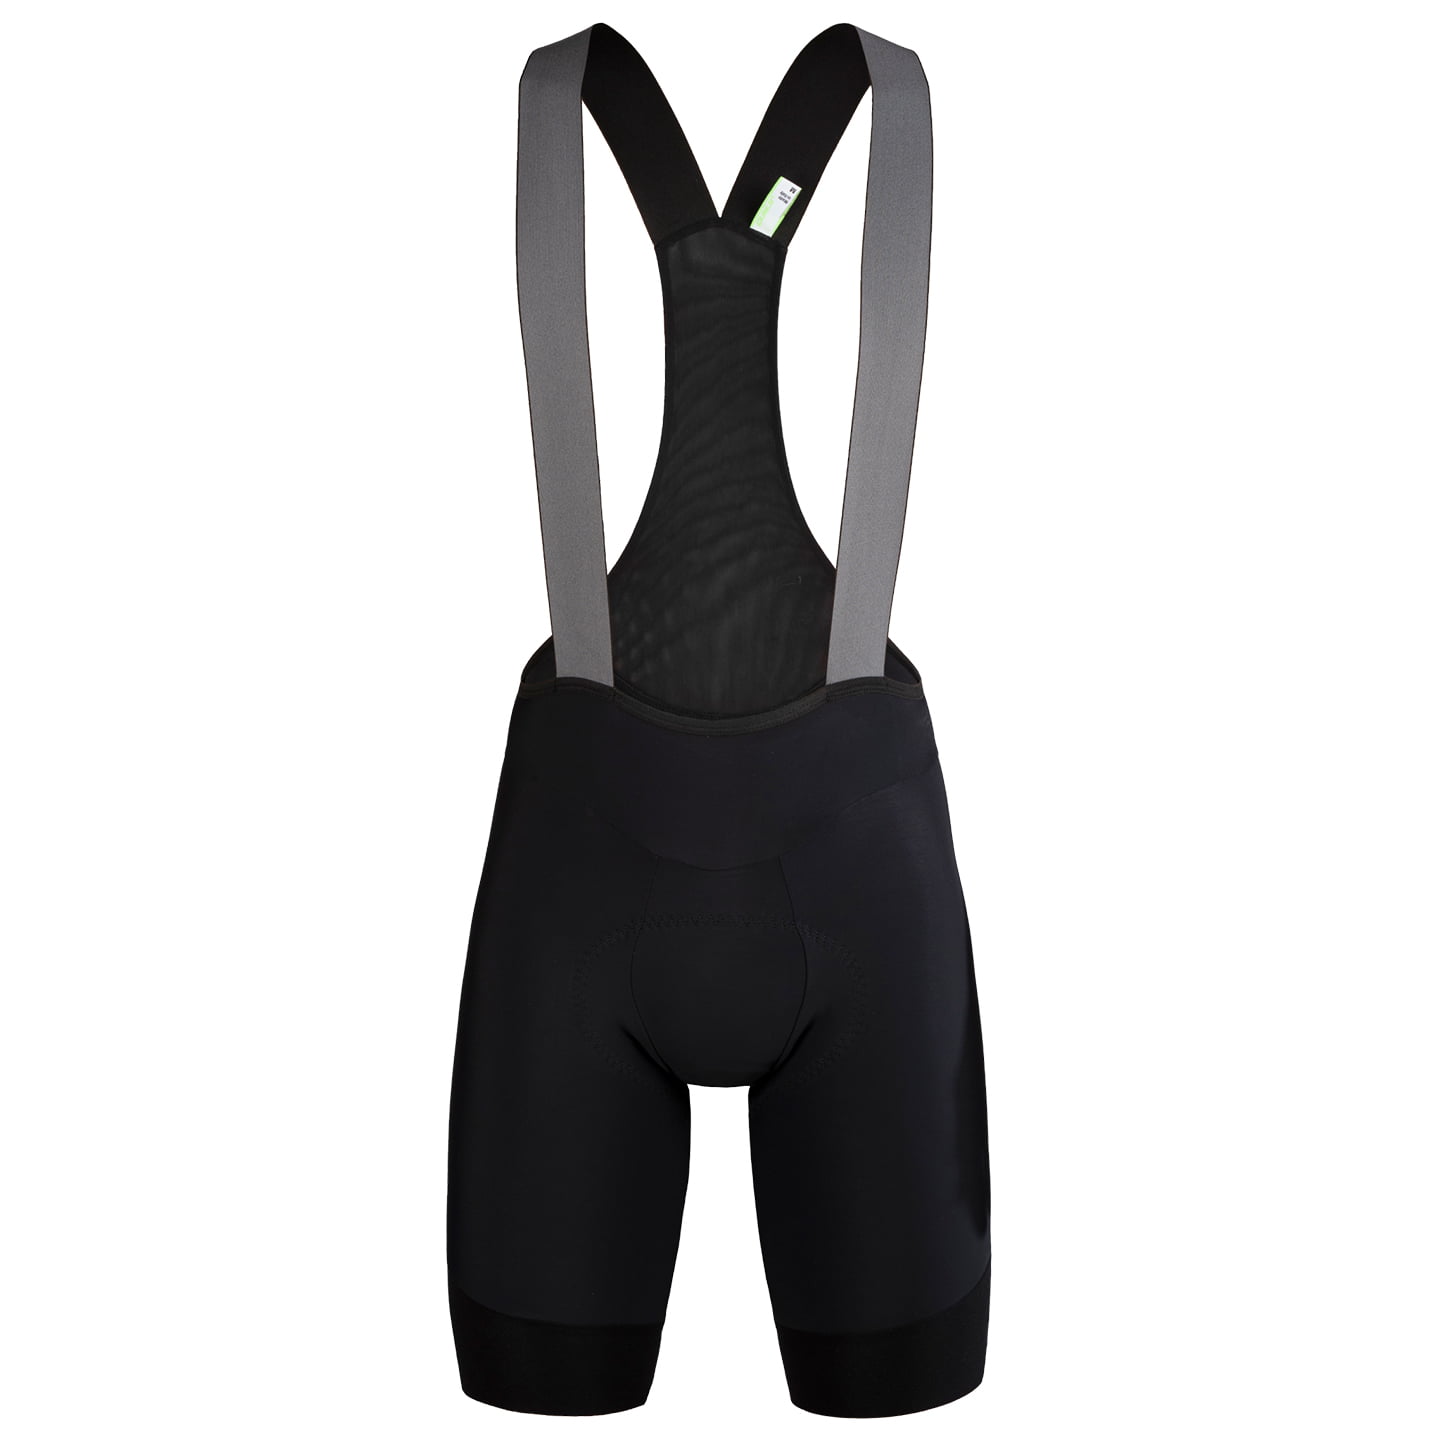 Q36.5 Bib Shorts Essential, for men, size S, Cycle trousers, Cycle clothing